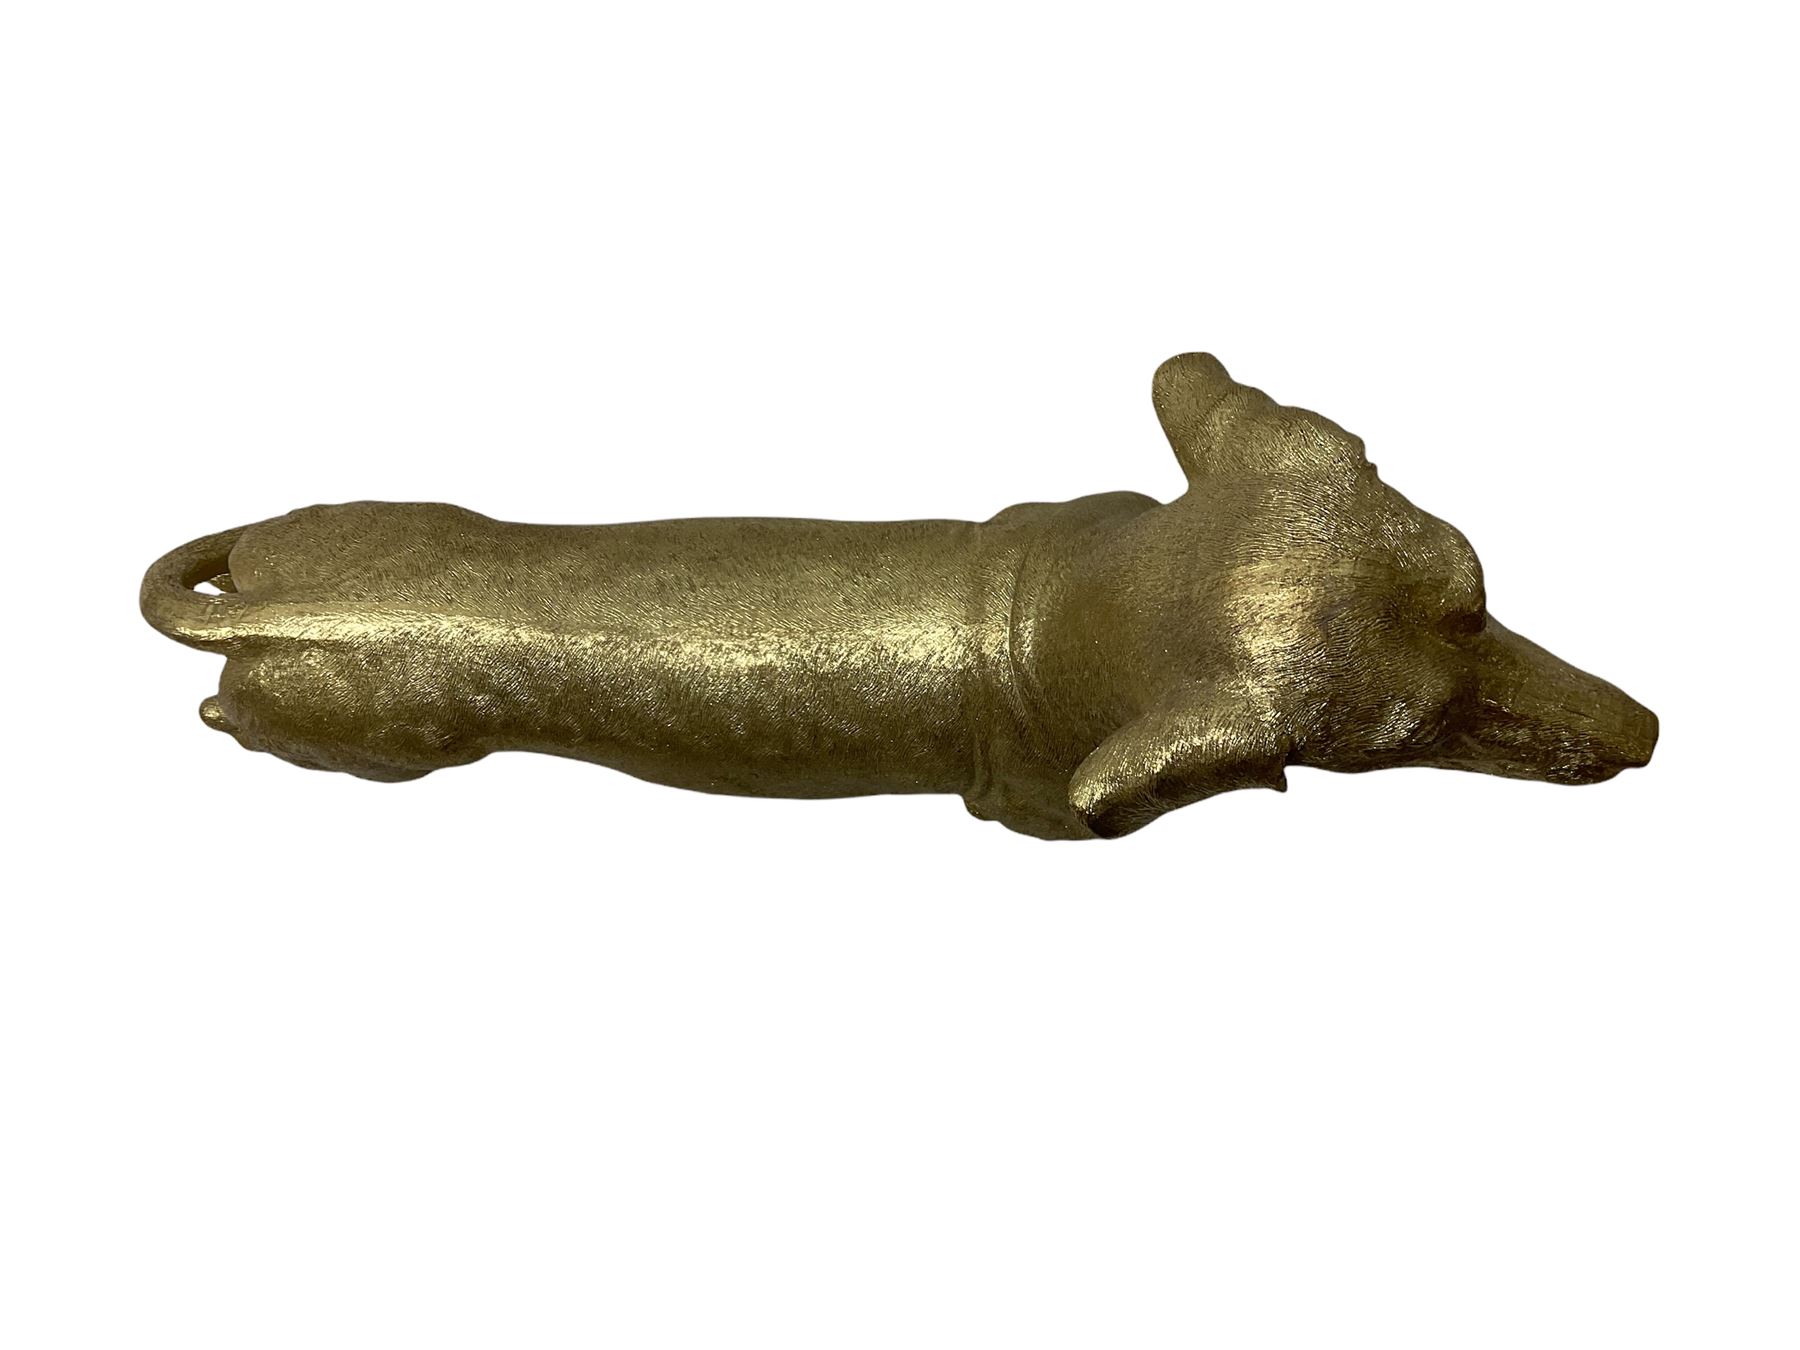 Composite metallic gold model of a Dachshund - Image 4 of 4